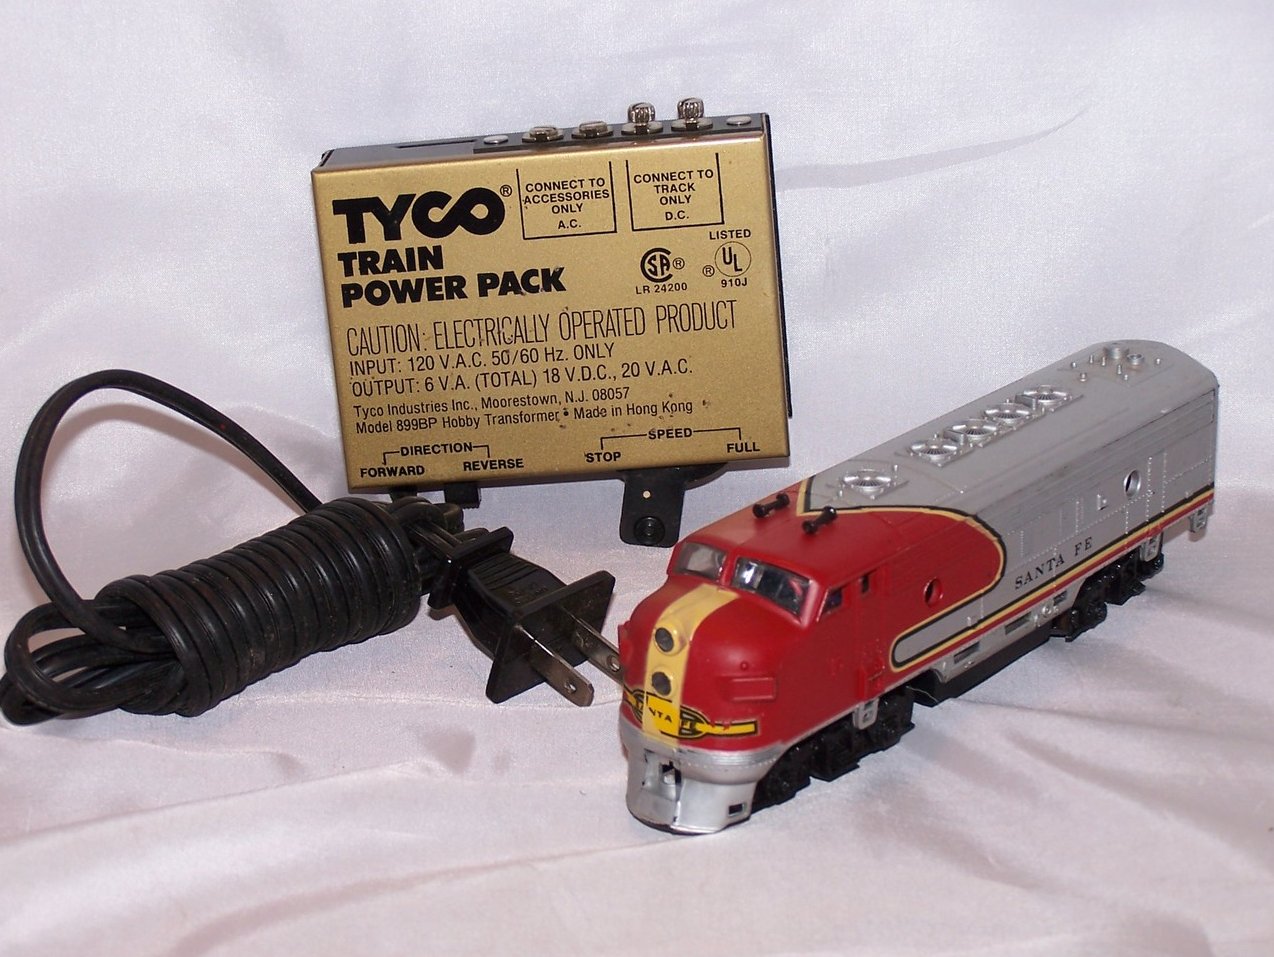  php/pd5043476/tyco_power_pack_life_like_santa_fe_electric_train_engine